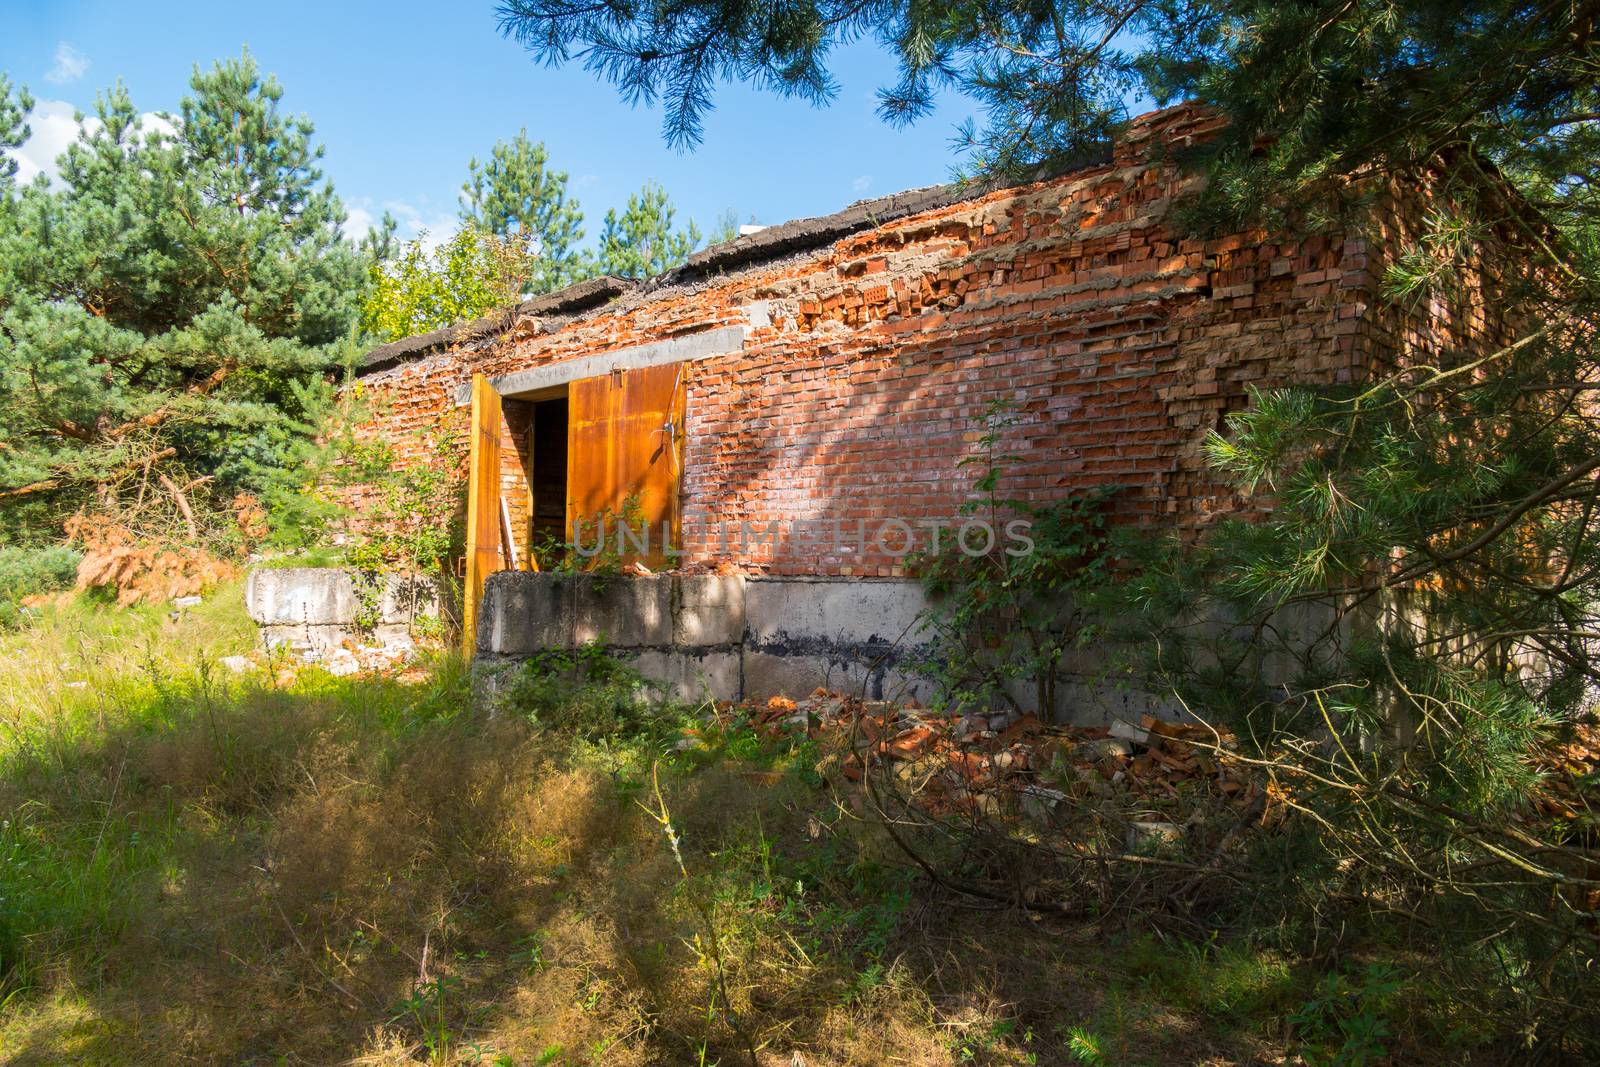 The large abandoned brick building is surrounded by tall, slender trees by Adamchuk